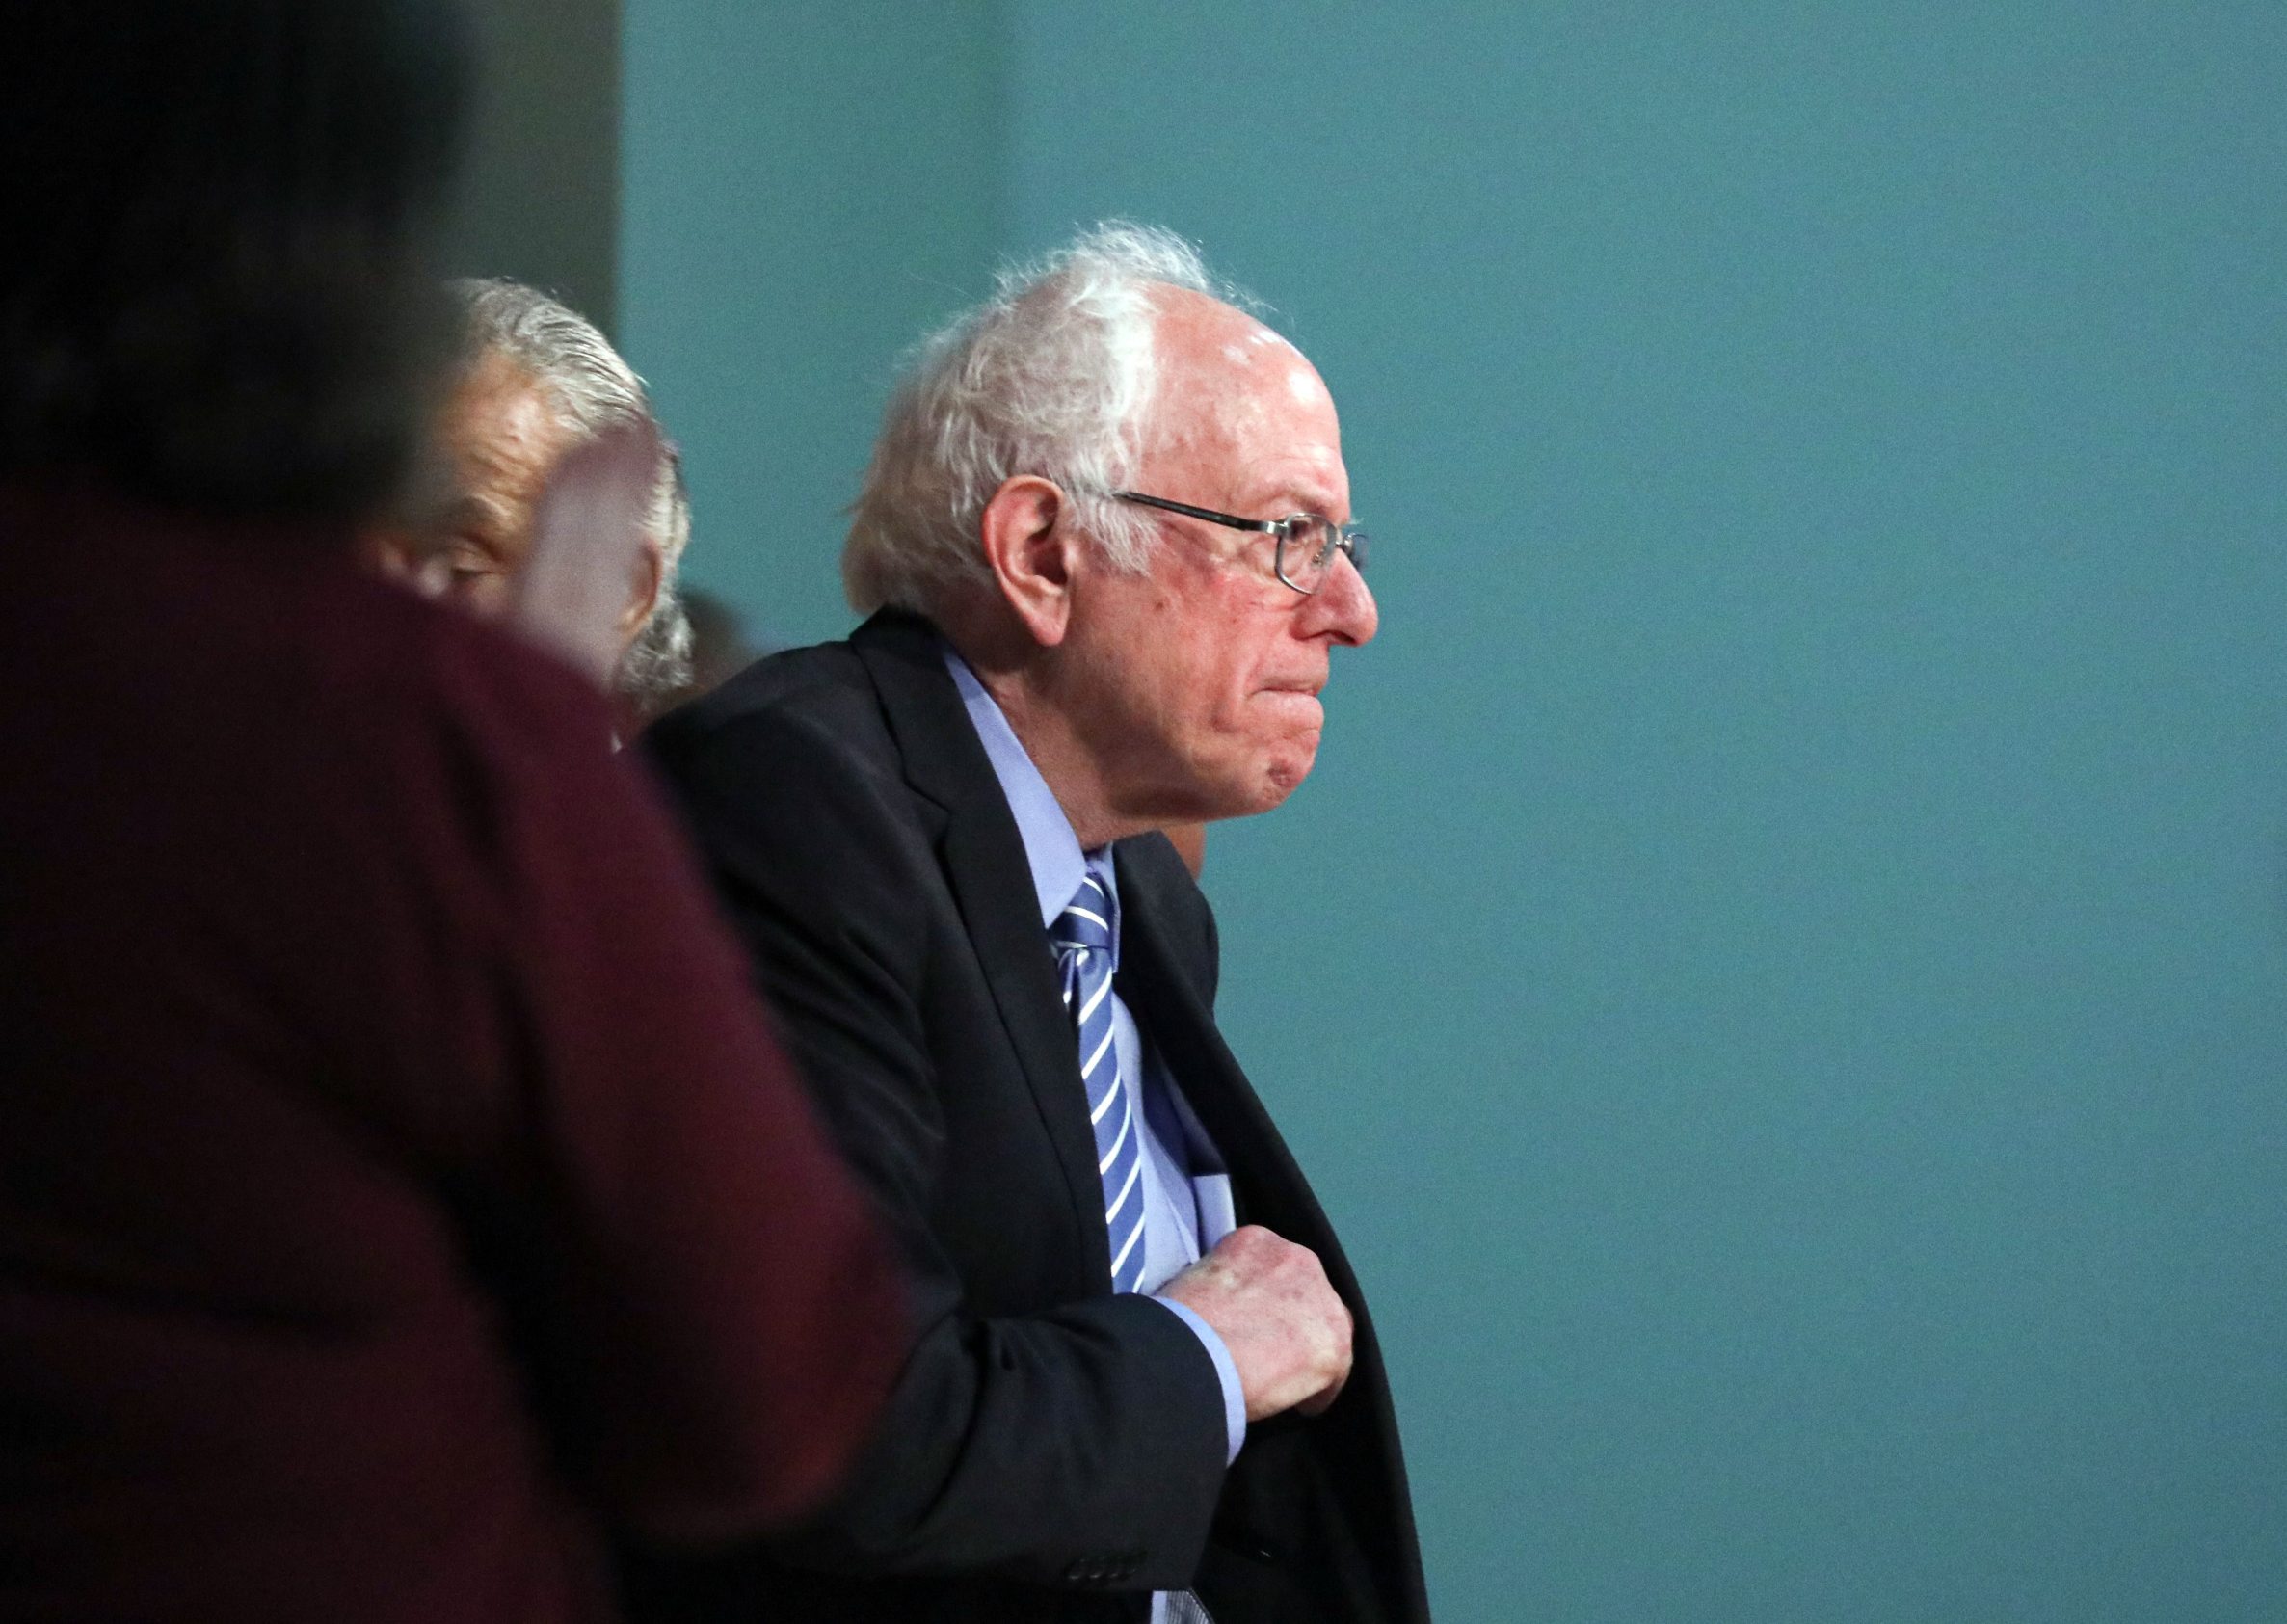 Democratic presidential hopeful and Vermont Senator Bernie Sanders (I-VT) arrives to deliver remarks during the Rev. Al Sharpton Minister's Breakfast at Mt. Moriah Missionary Baptist Church in North Charleston, South Carolina on February 26, 2020. - Six candidates minus former New York City Mayor, Michael Bloomberg, spoke to the breakfast as they court voters before the South Carolina primary on February 29, 2020. (Photo by Logan CYRUS / AFP)